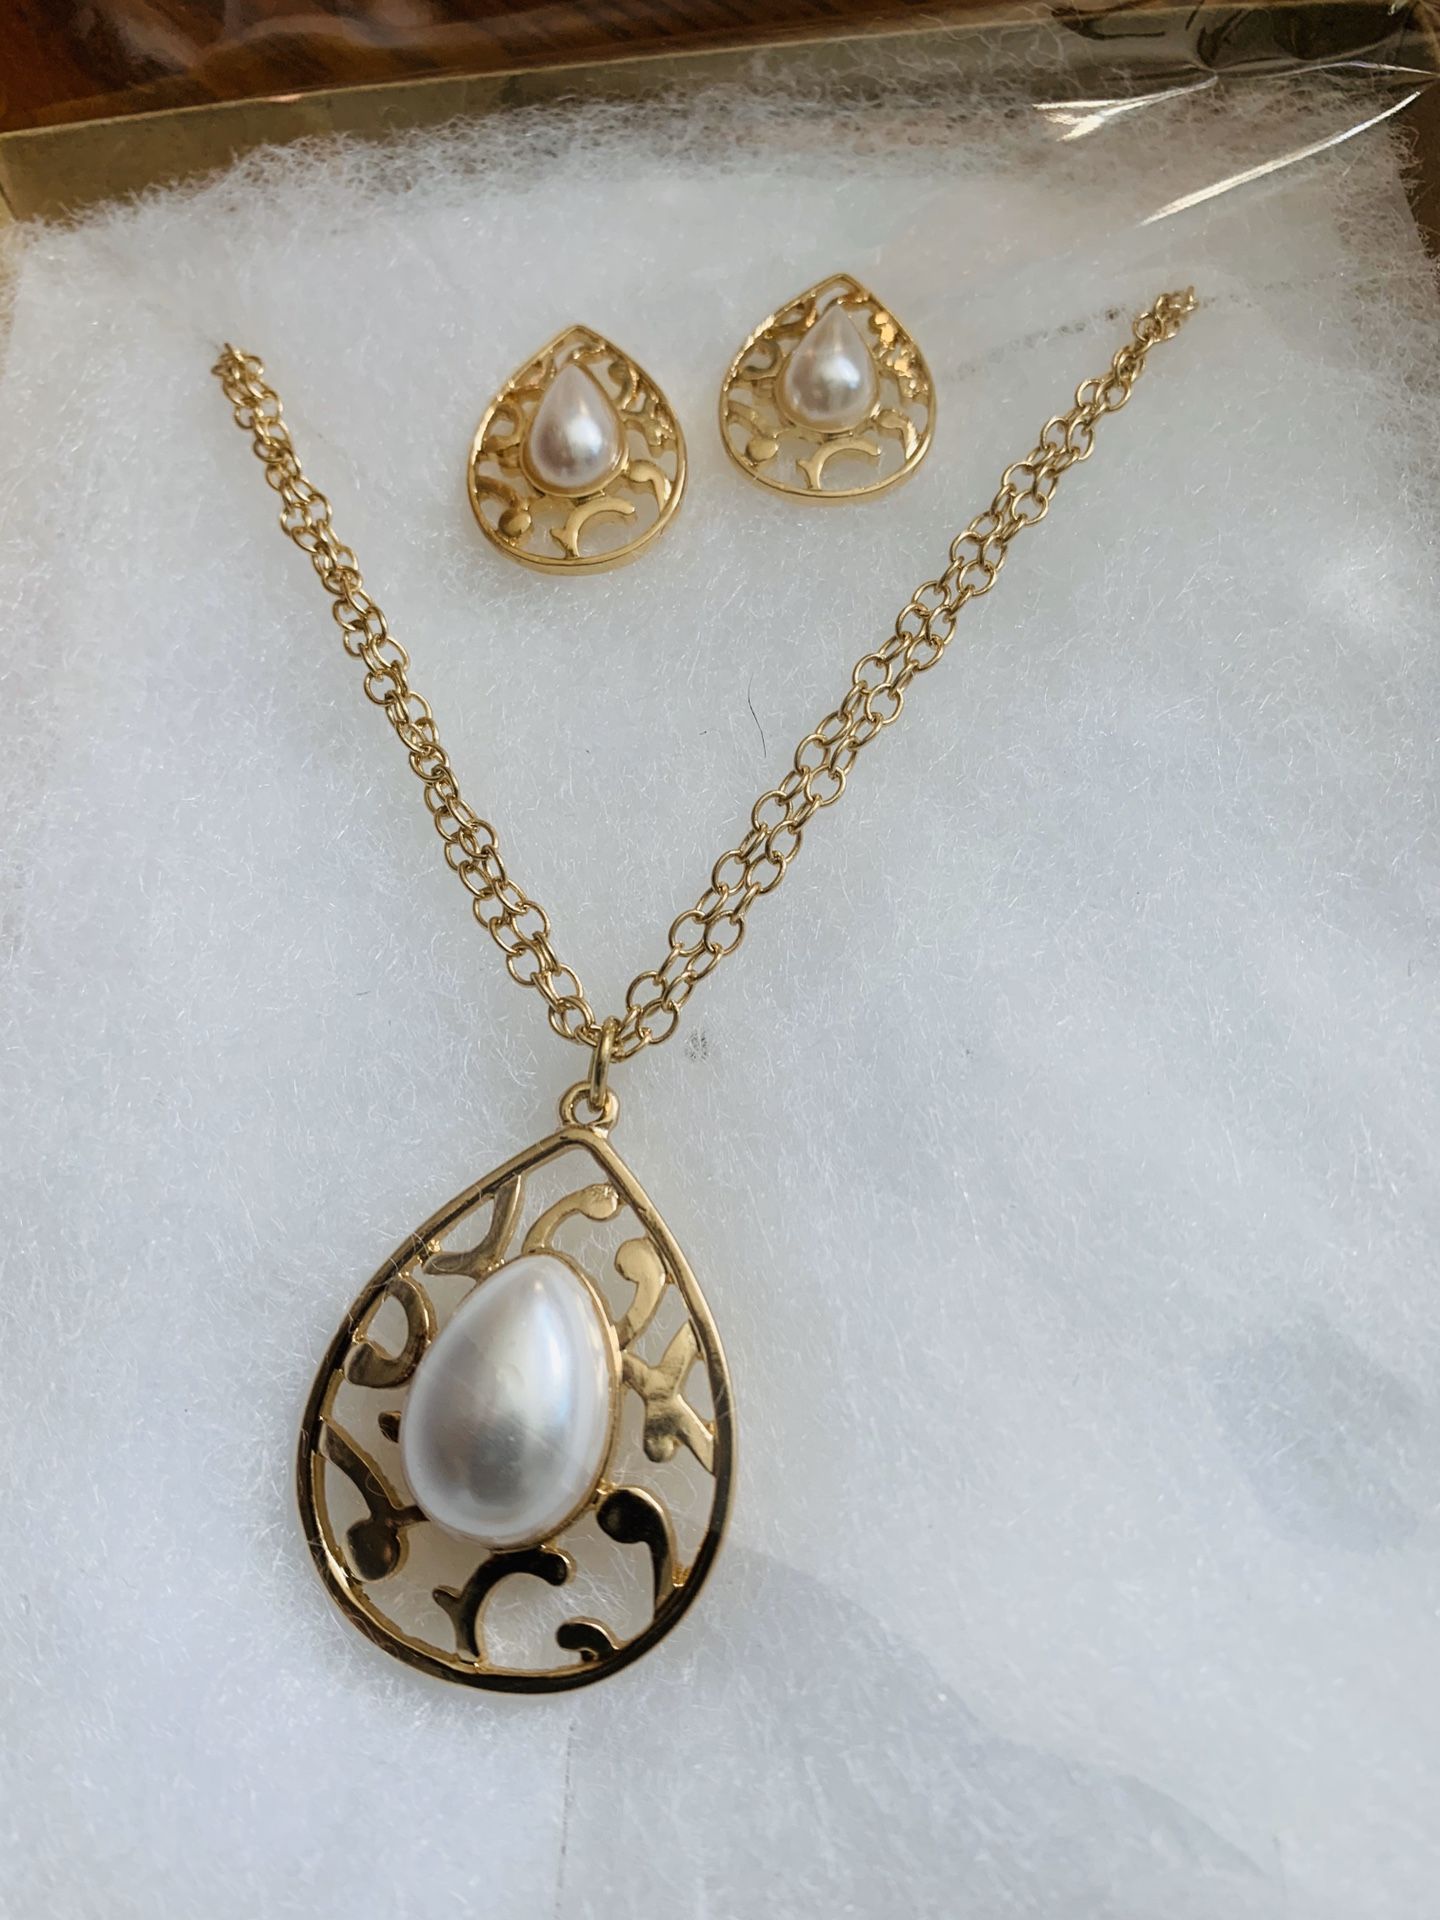 Lovely gold plated and faux pearl custom jewelry set. Boxed beautifully.